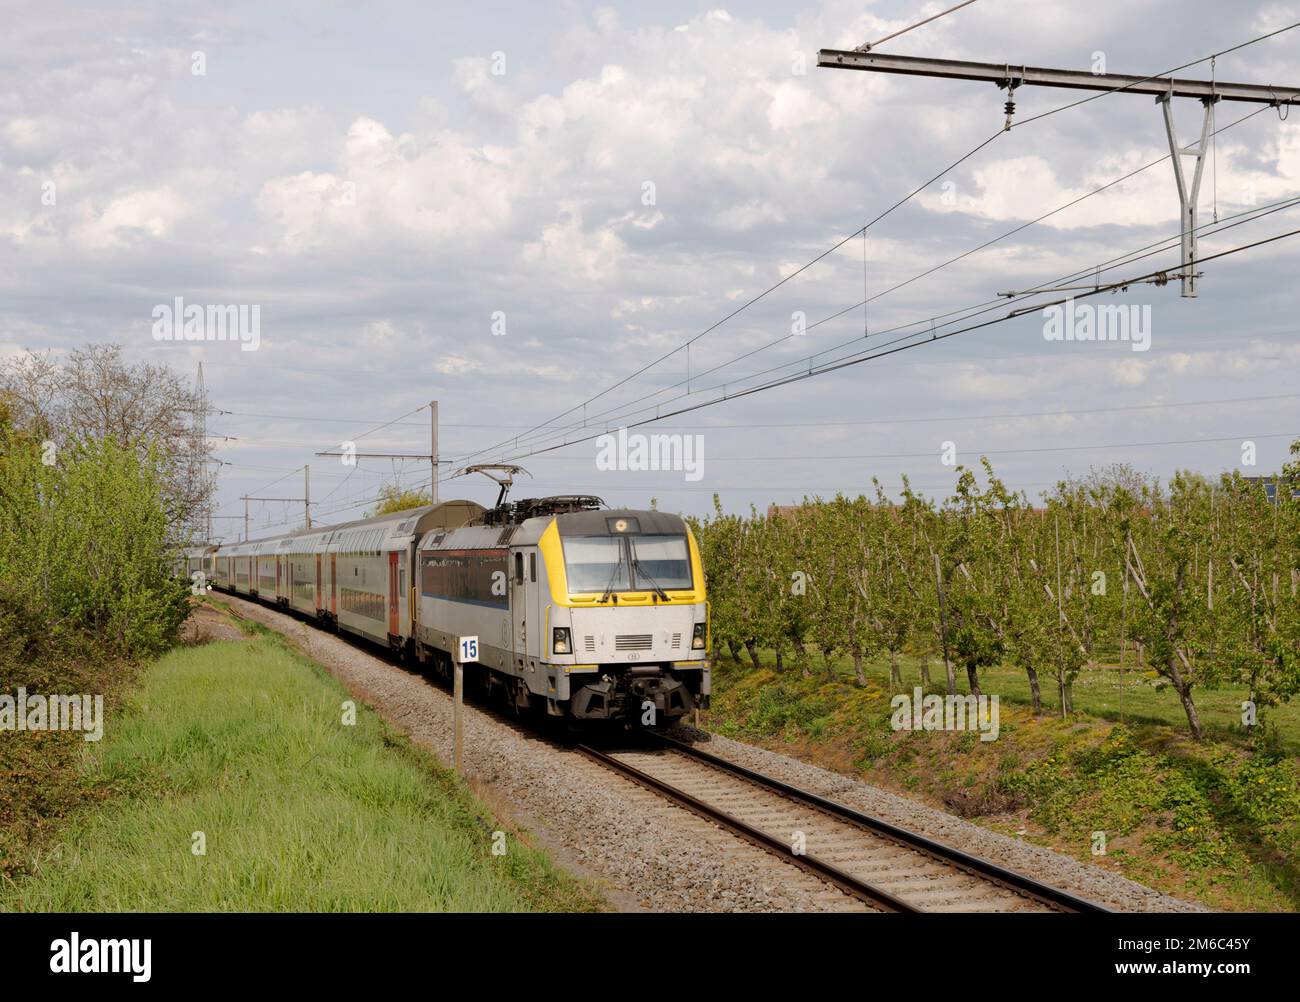 Train in the countryside. Walking towards. Front side. Train in Belgium Stock Photo